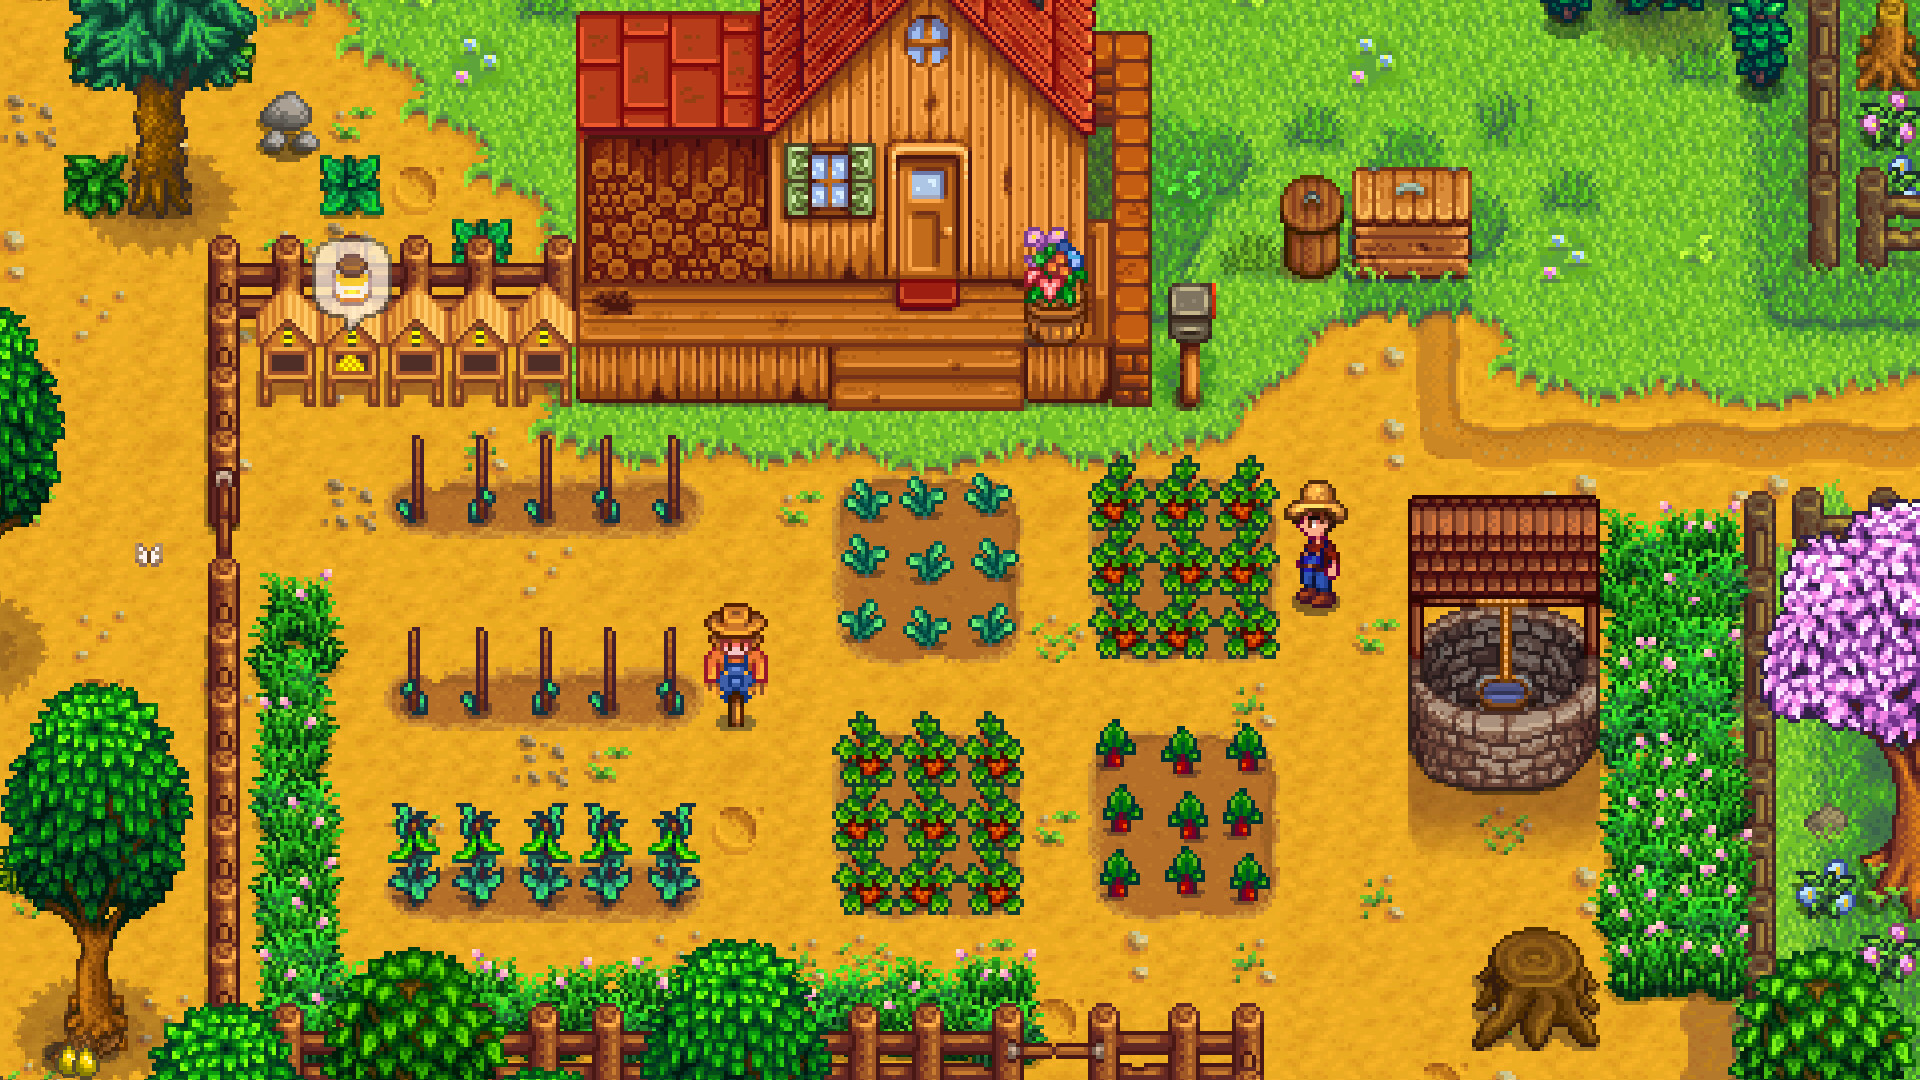 A screenshot of Stardew Valley: an overhead view of a player’s farm, with rows and patches of crops next to a farmhouse, all rendered in a low-resolution style.